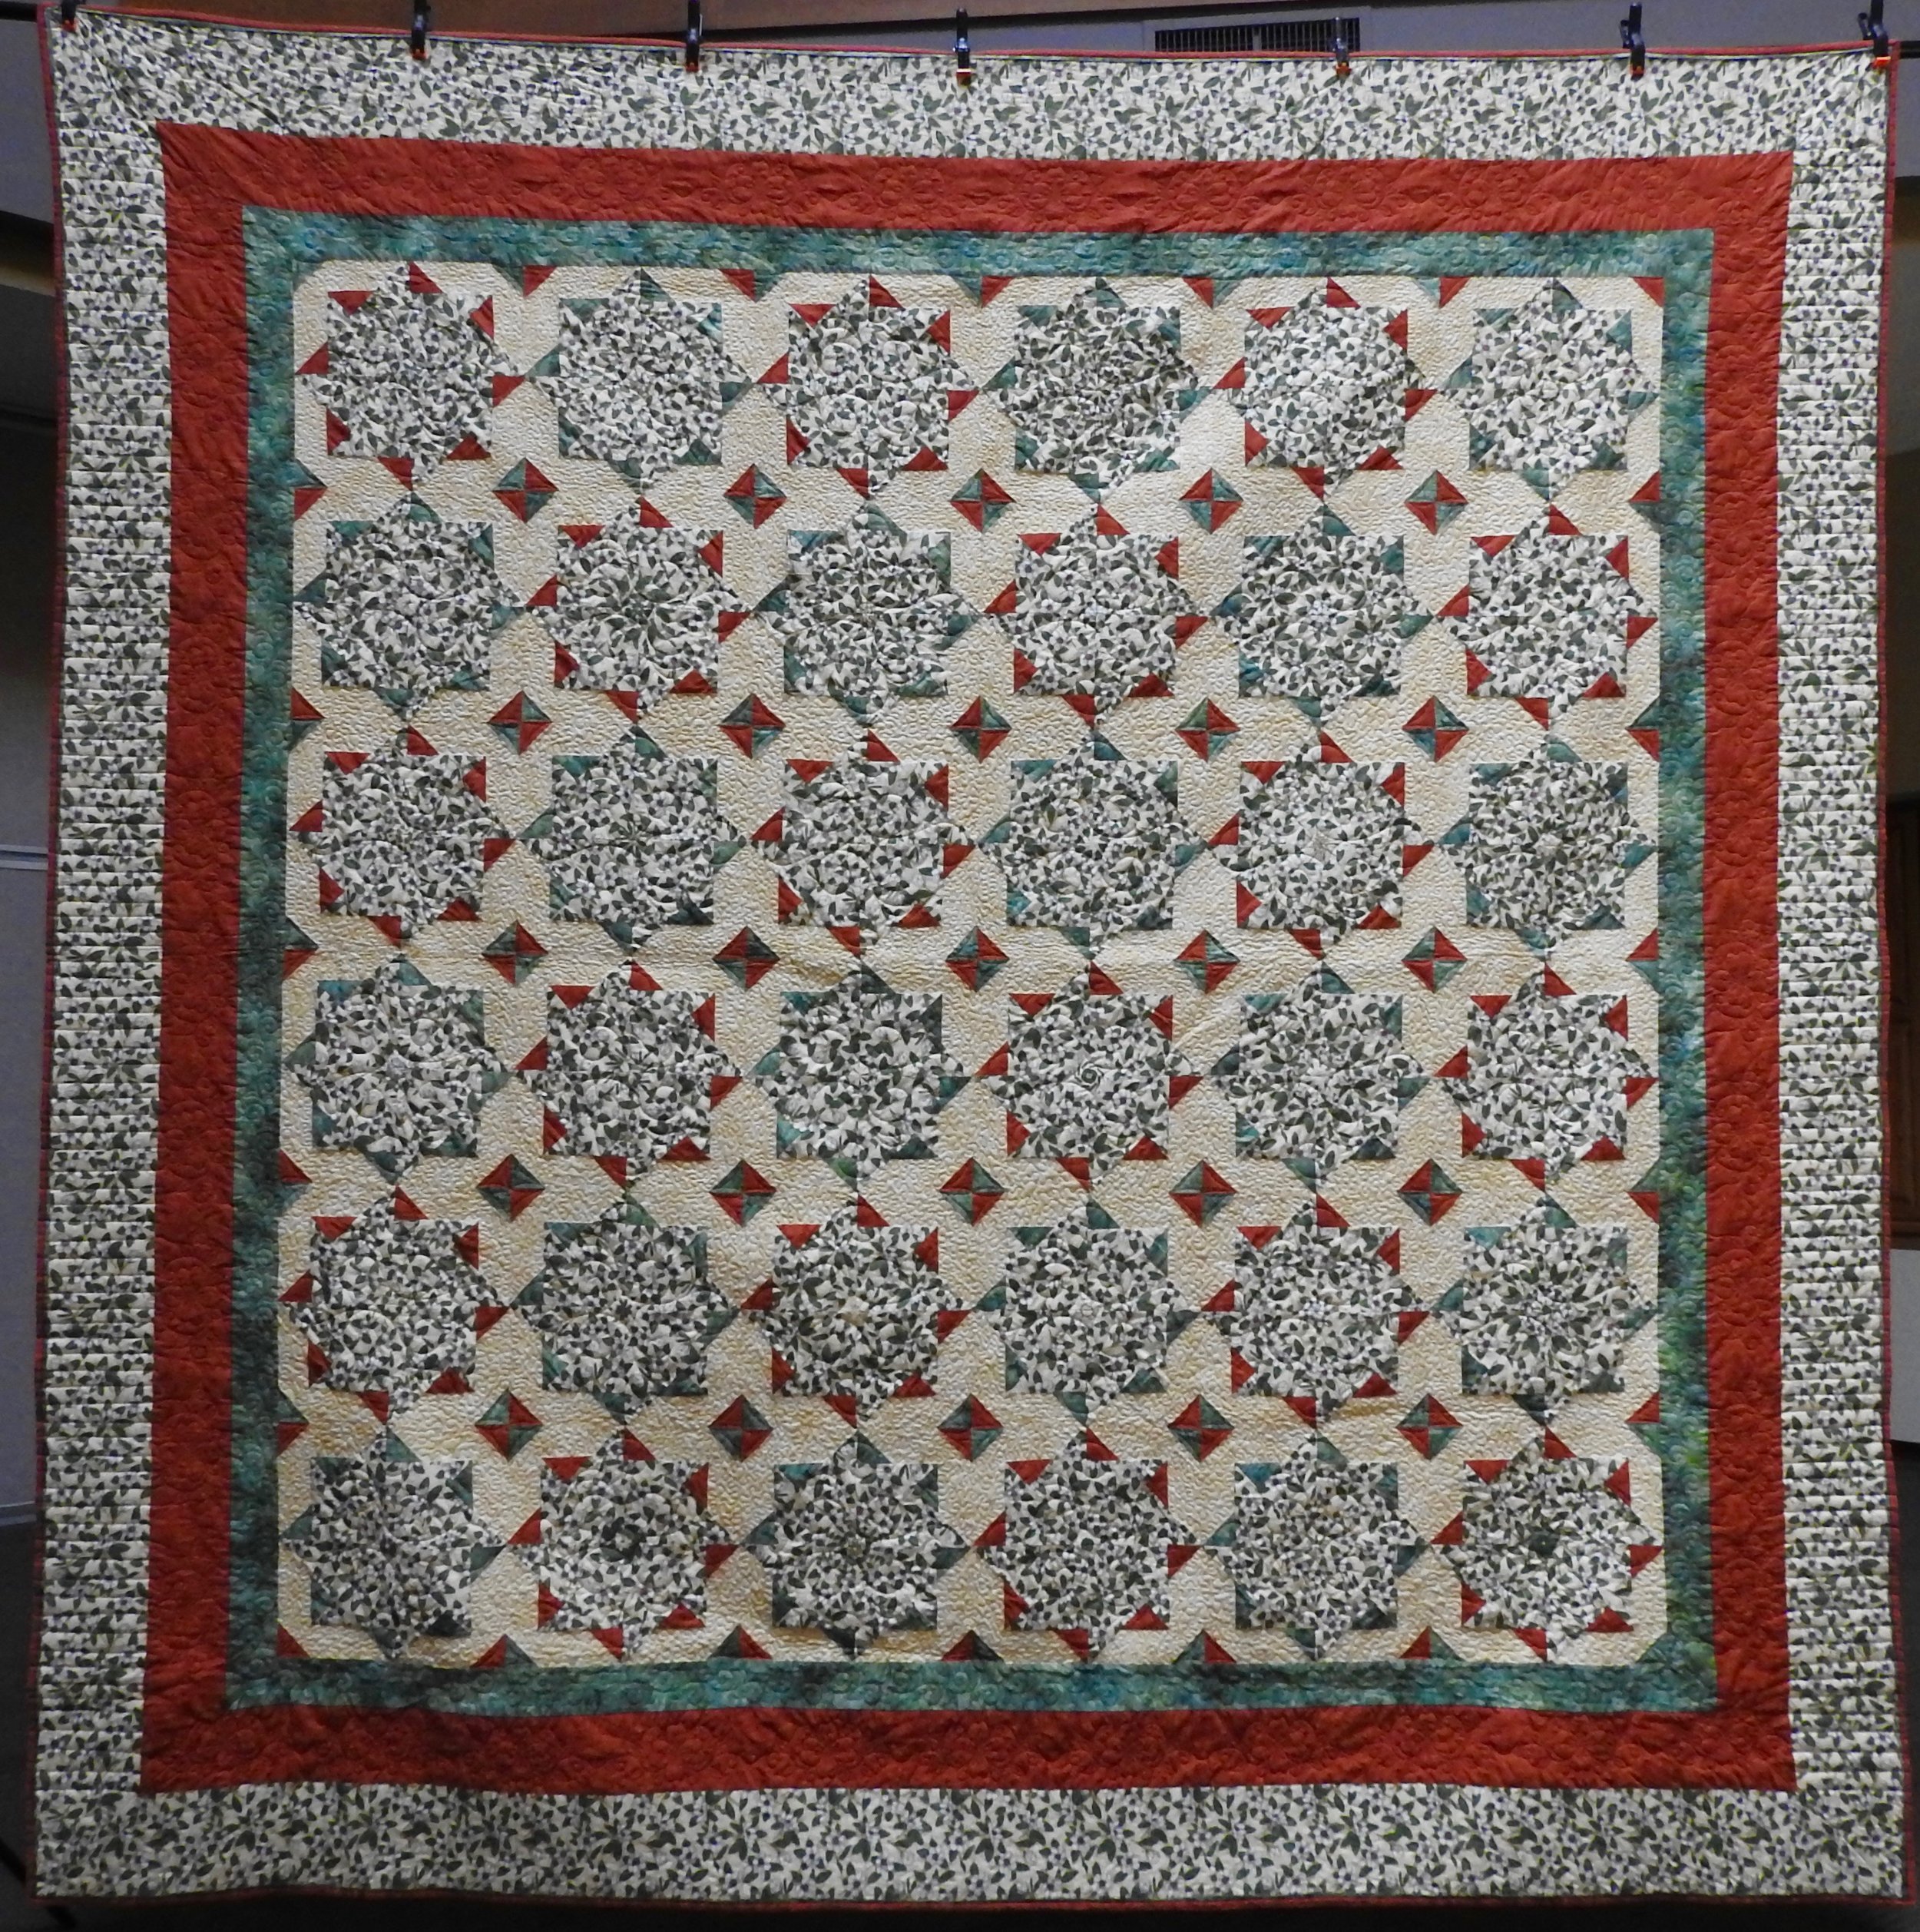 Whack ’n Stack, Pieced by Jean Mann Graber, Custom Machine Quilted, donated by the Cal Graber Family, 116 x 118”